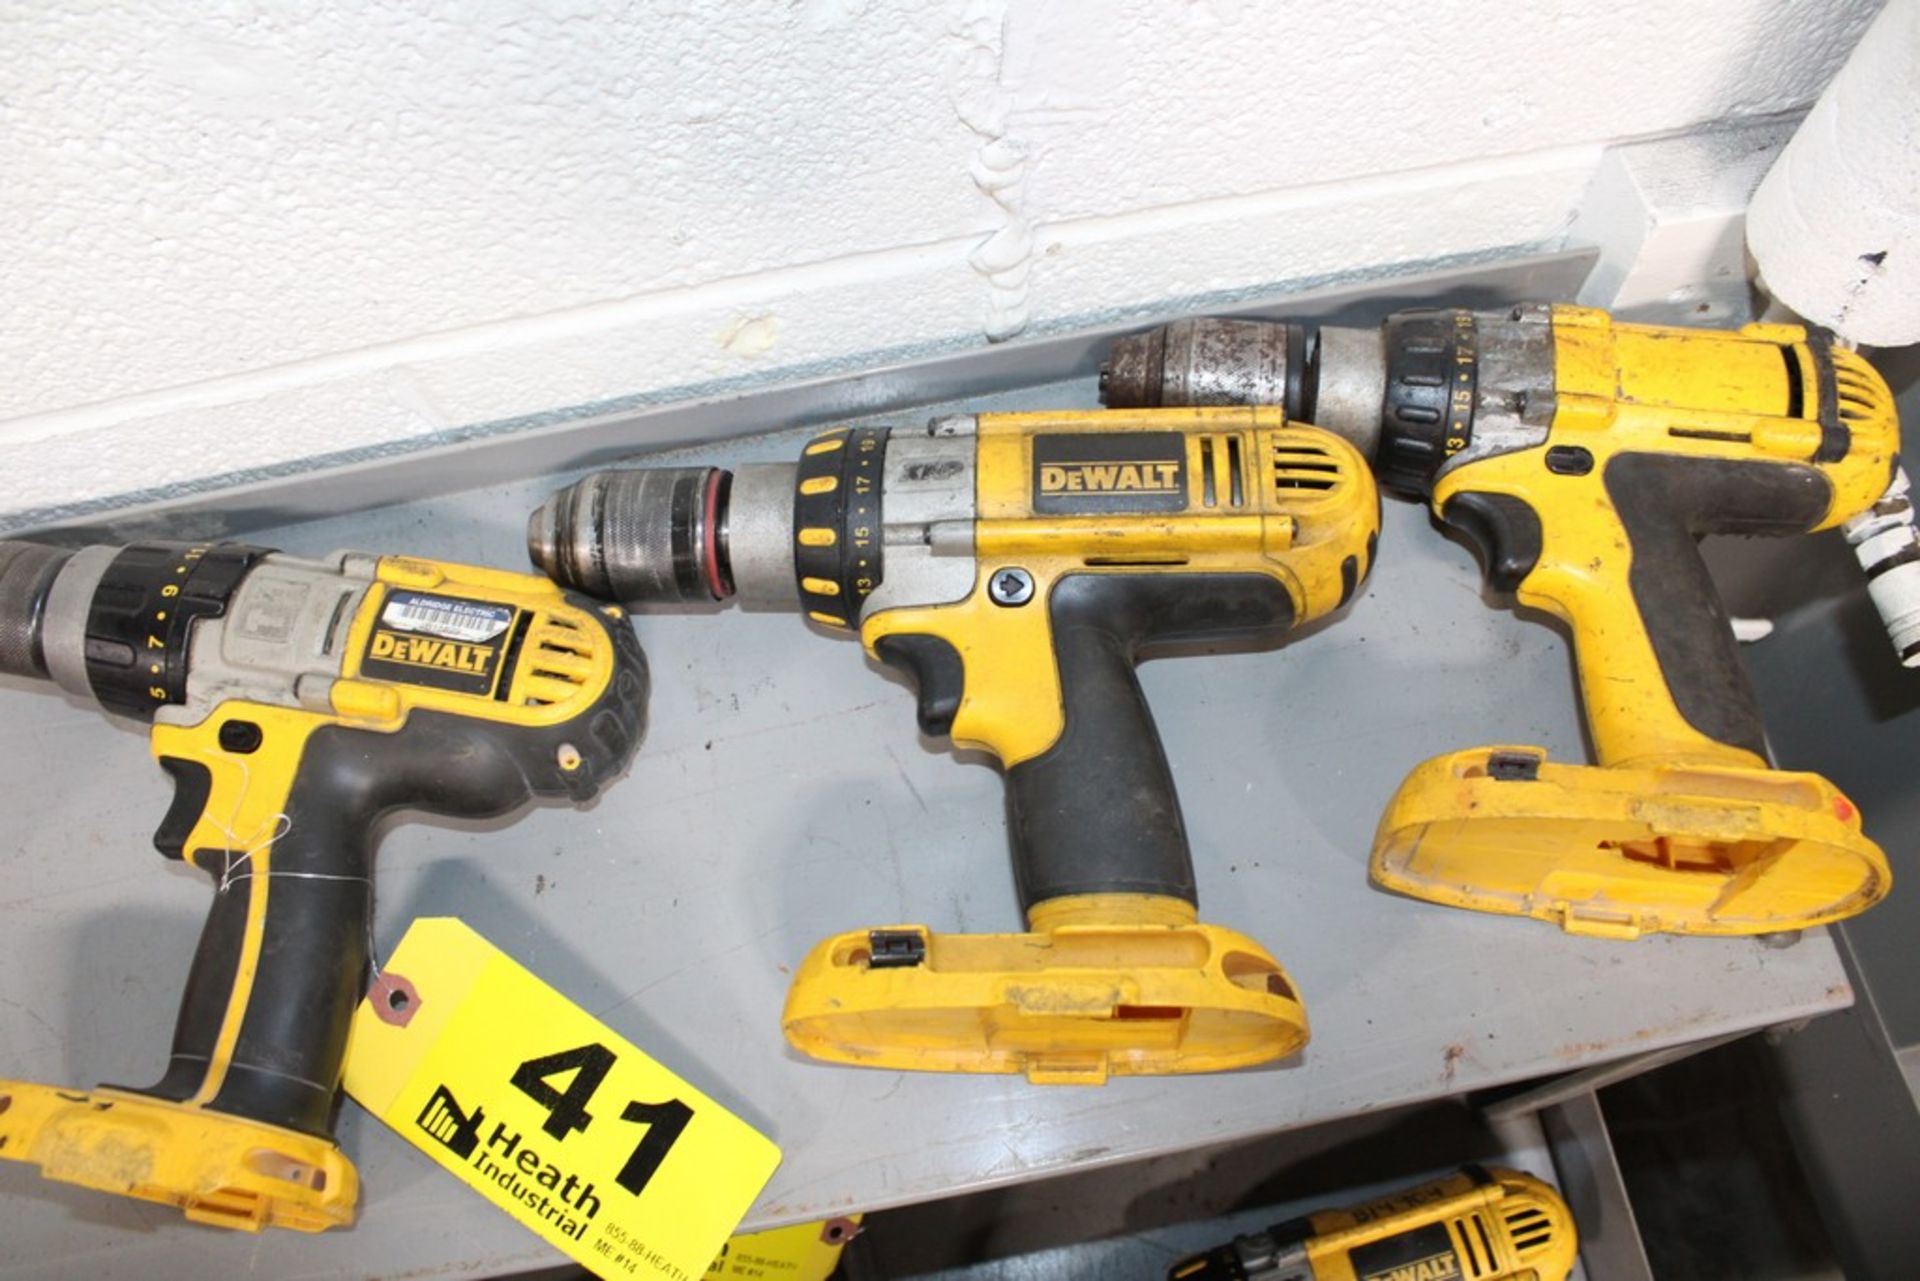 DEWALT MODEL DC920 XRP, DCD950, AND DC987 18 VOLT 1/2" CORDLESS DRILL DRIVERS (NO BATTERY OR - Image 2 of 2